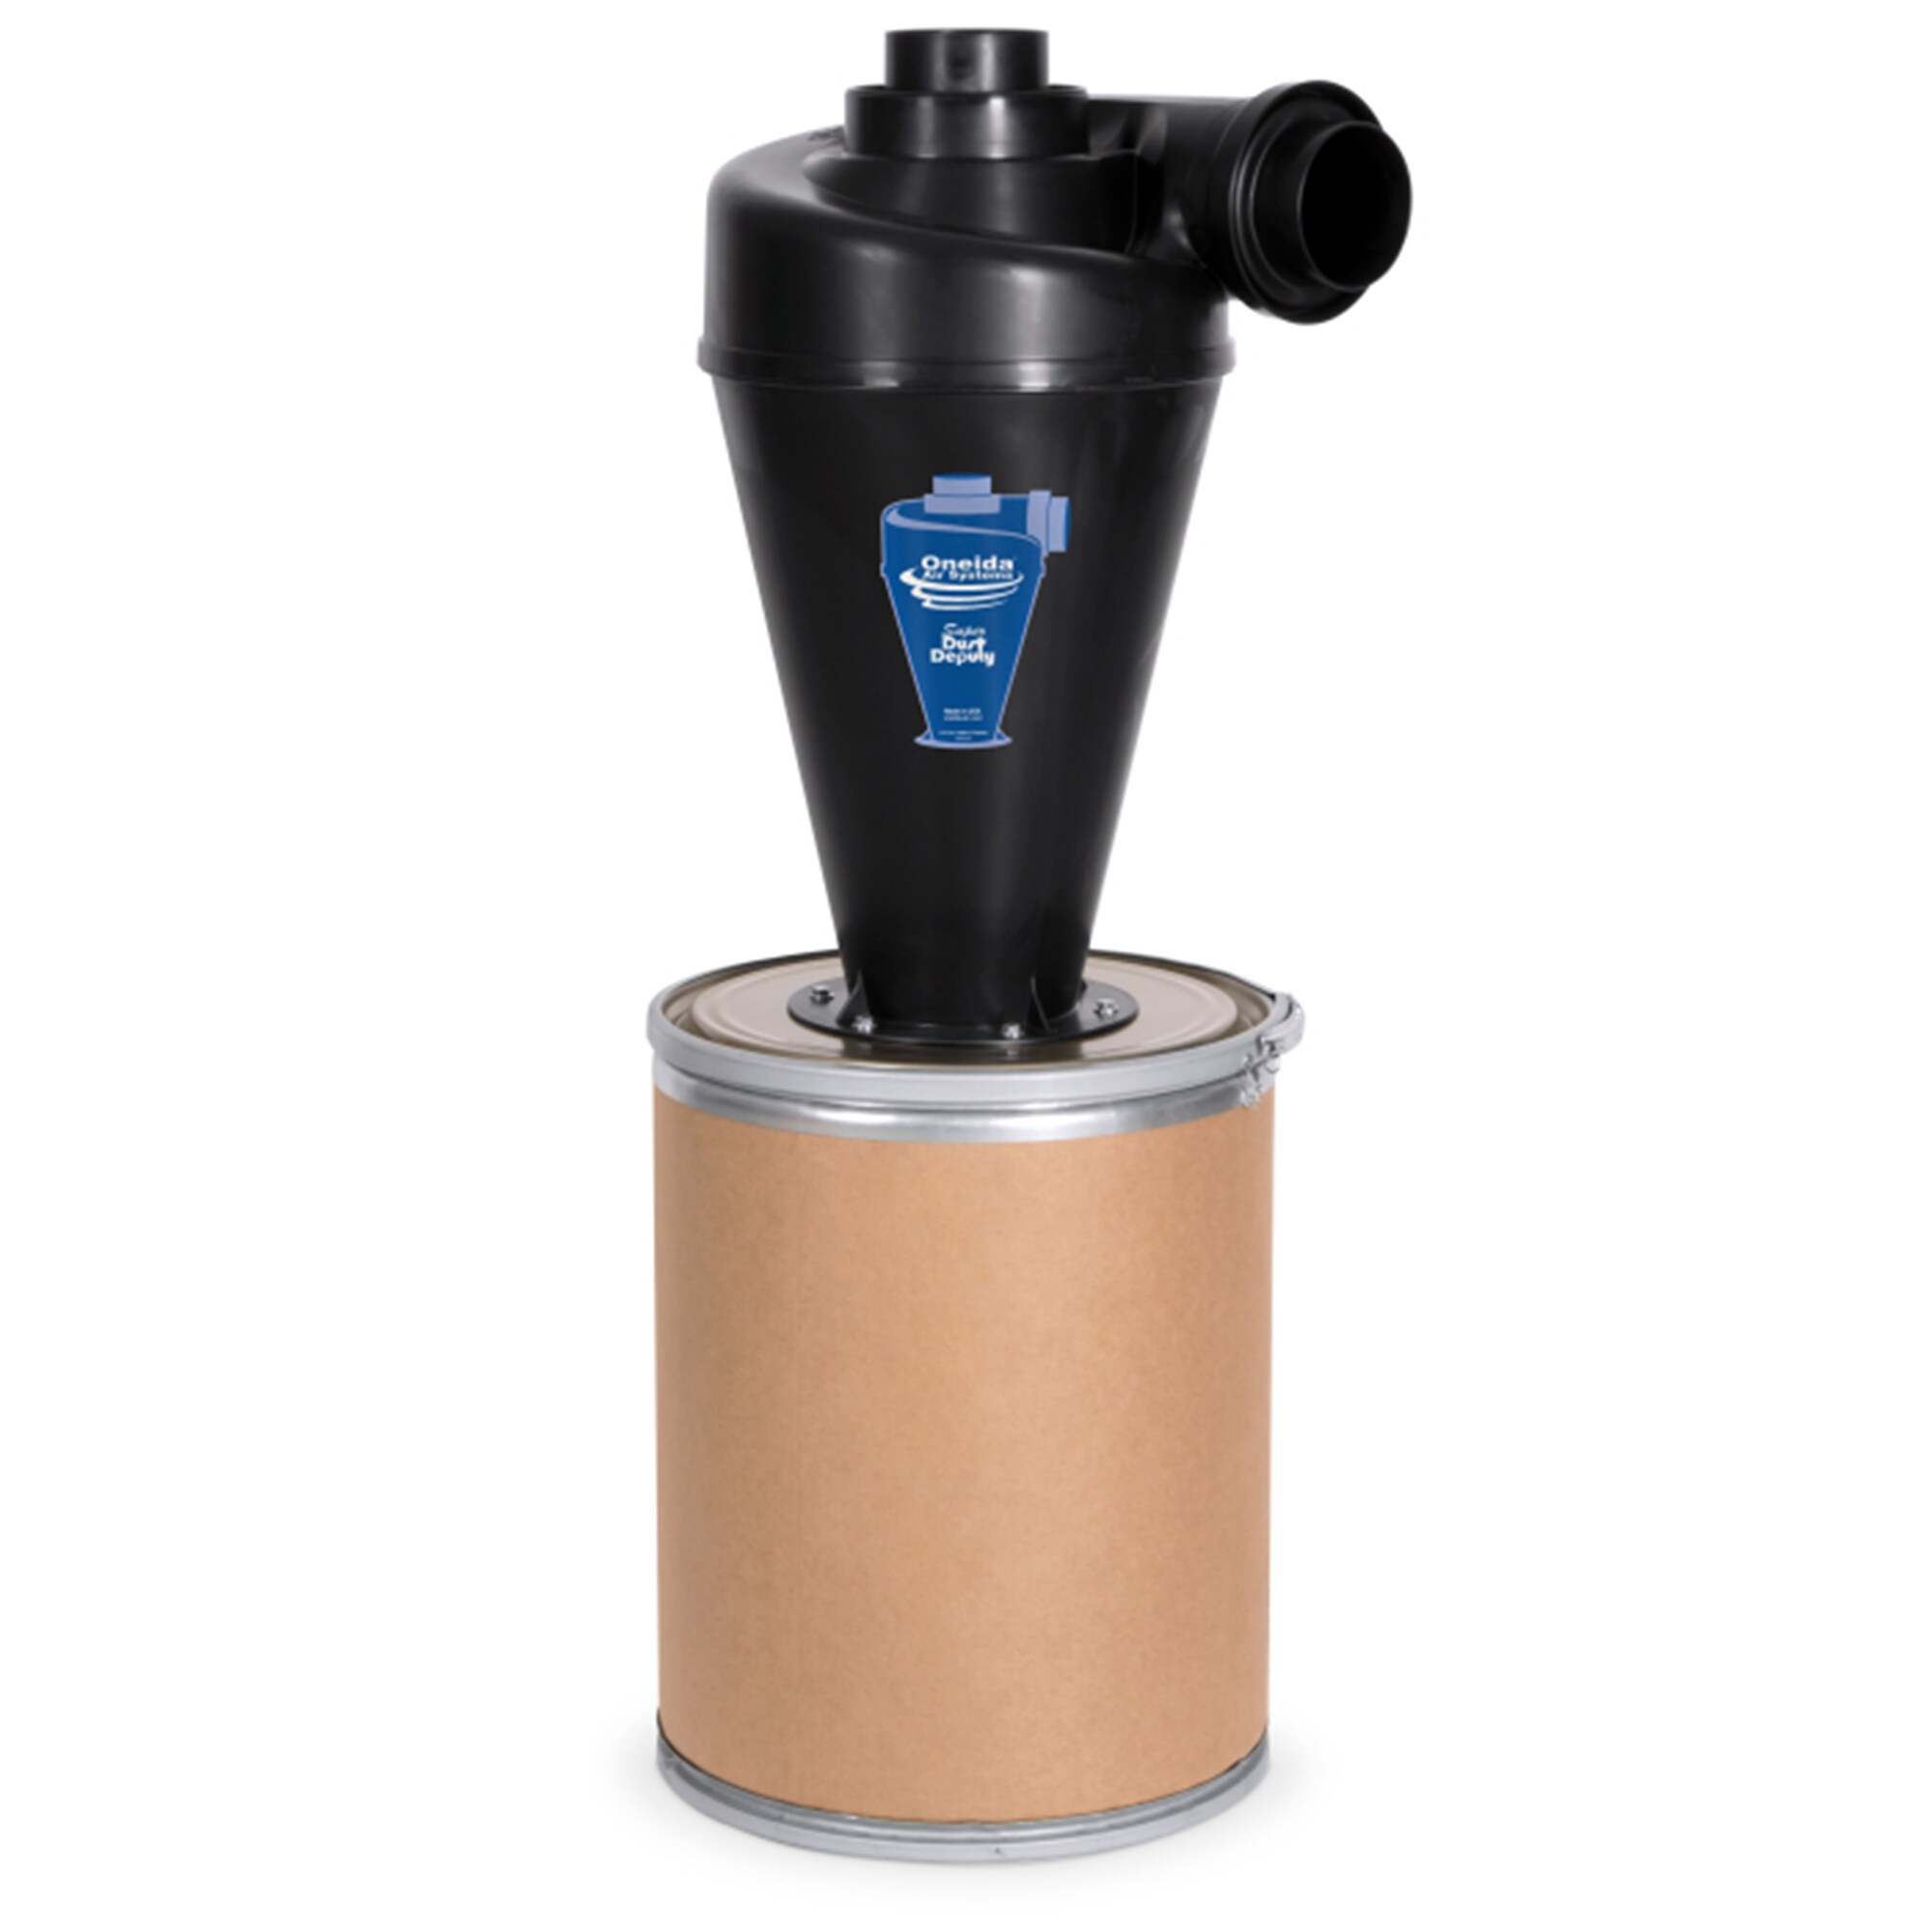 4/5 Cyclone Dust Collection System with 15-Gallon Fiberboard Dust Bin and Reducer Adapters | - Oneida Air Systems 314529